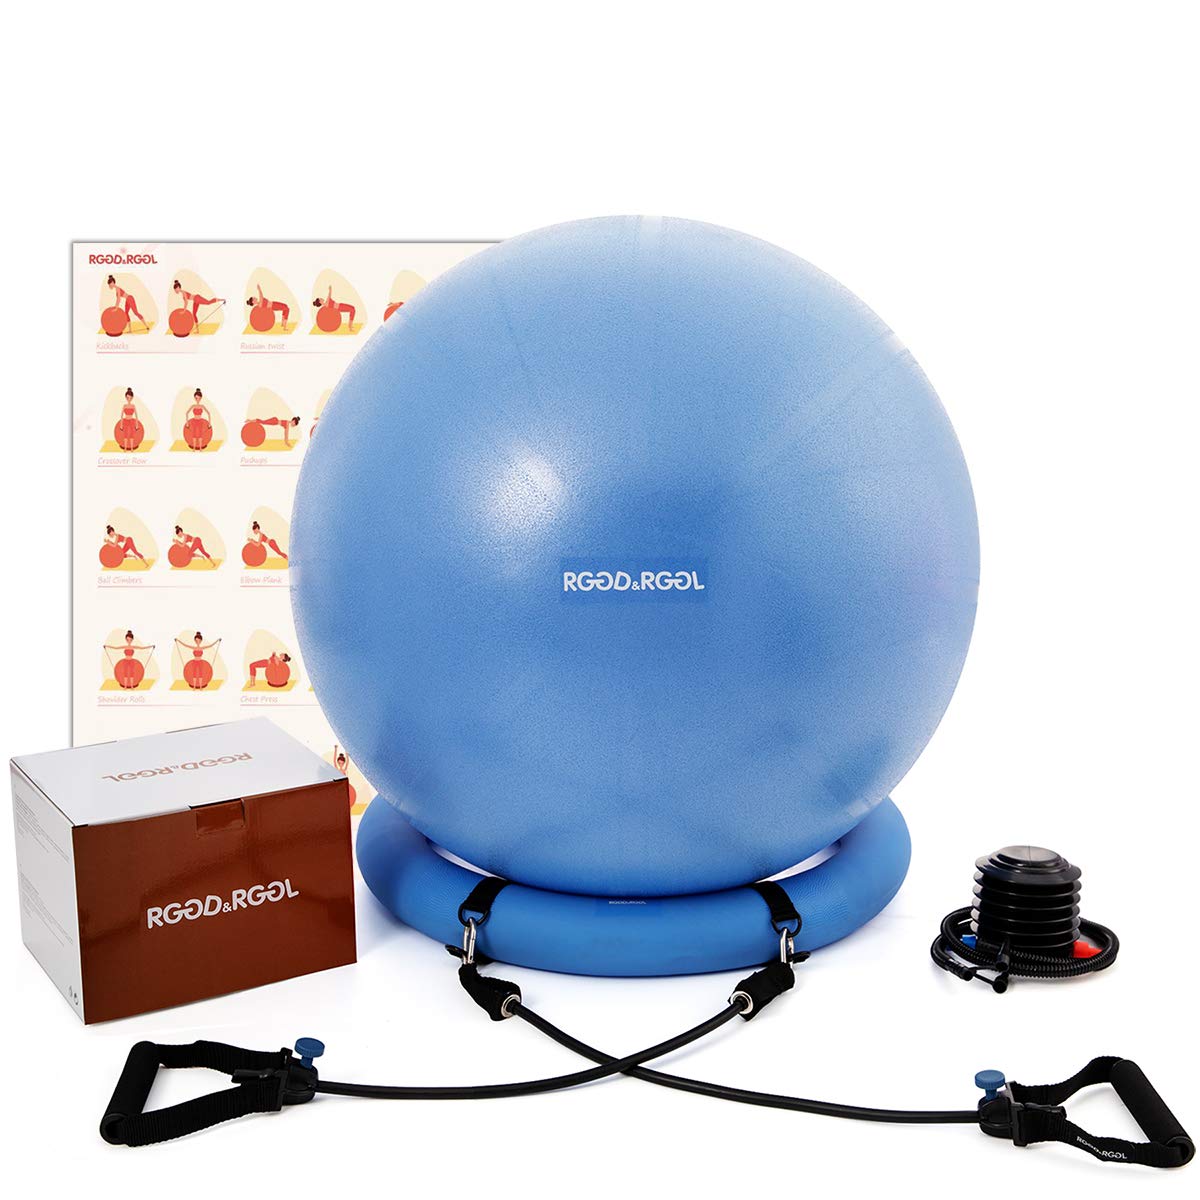 Yoga Ball Chair, RGGD&RGGL Exercise Ball with Leak-Proof Design, Stability Ring&2 Adjustable Resistance Bands for Any Fitness Level, 1.5 Times Thic...